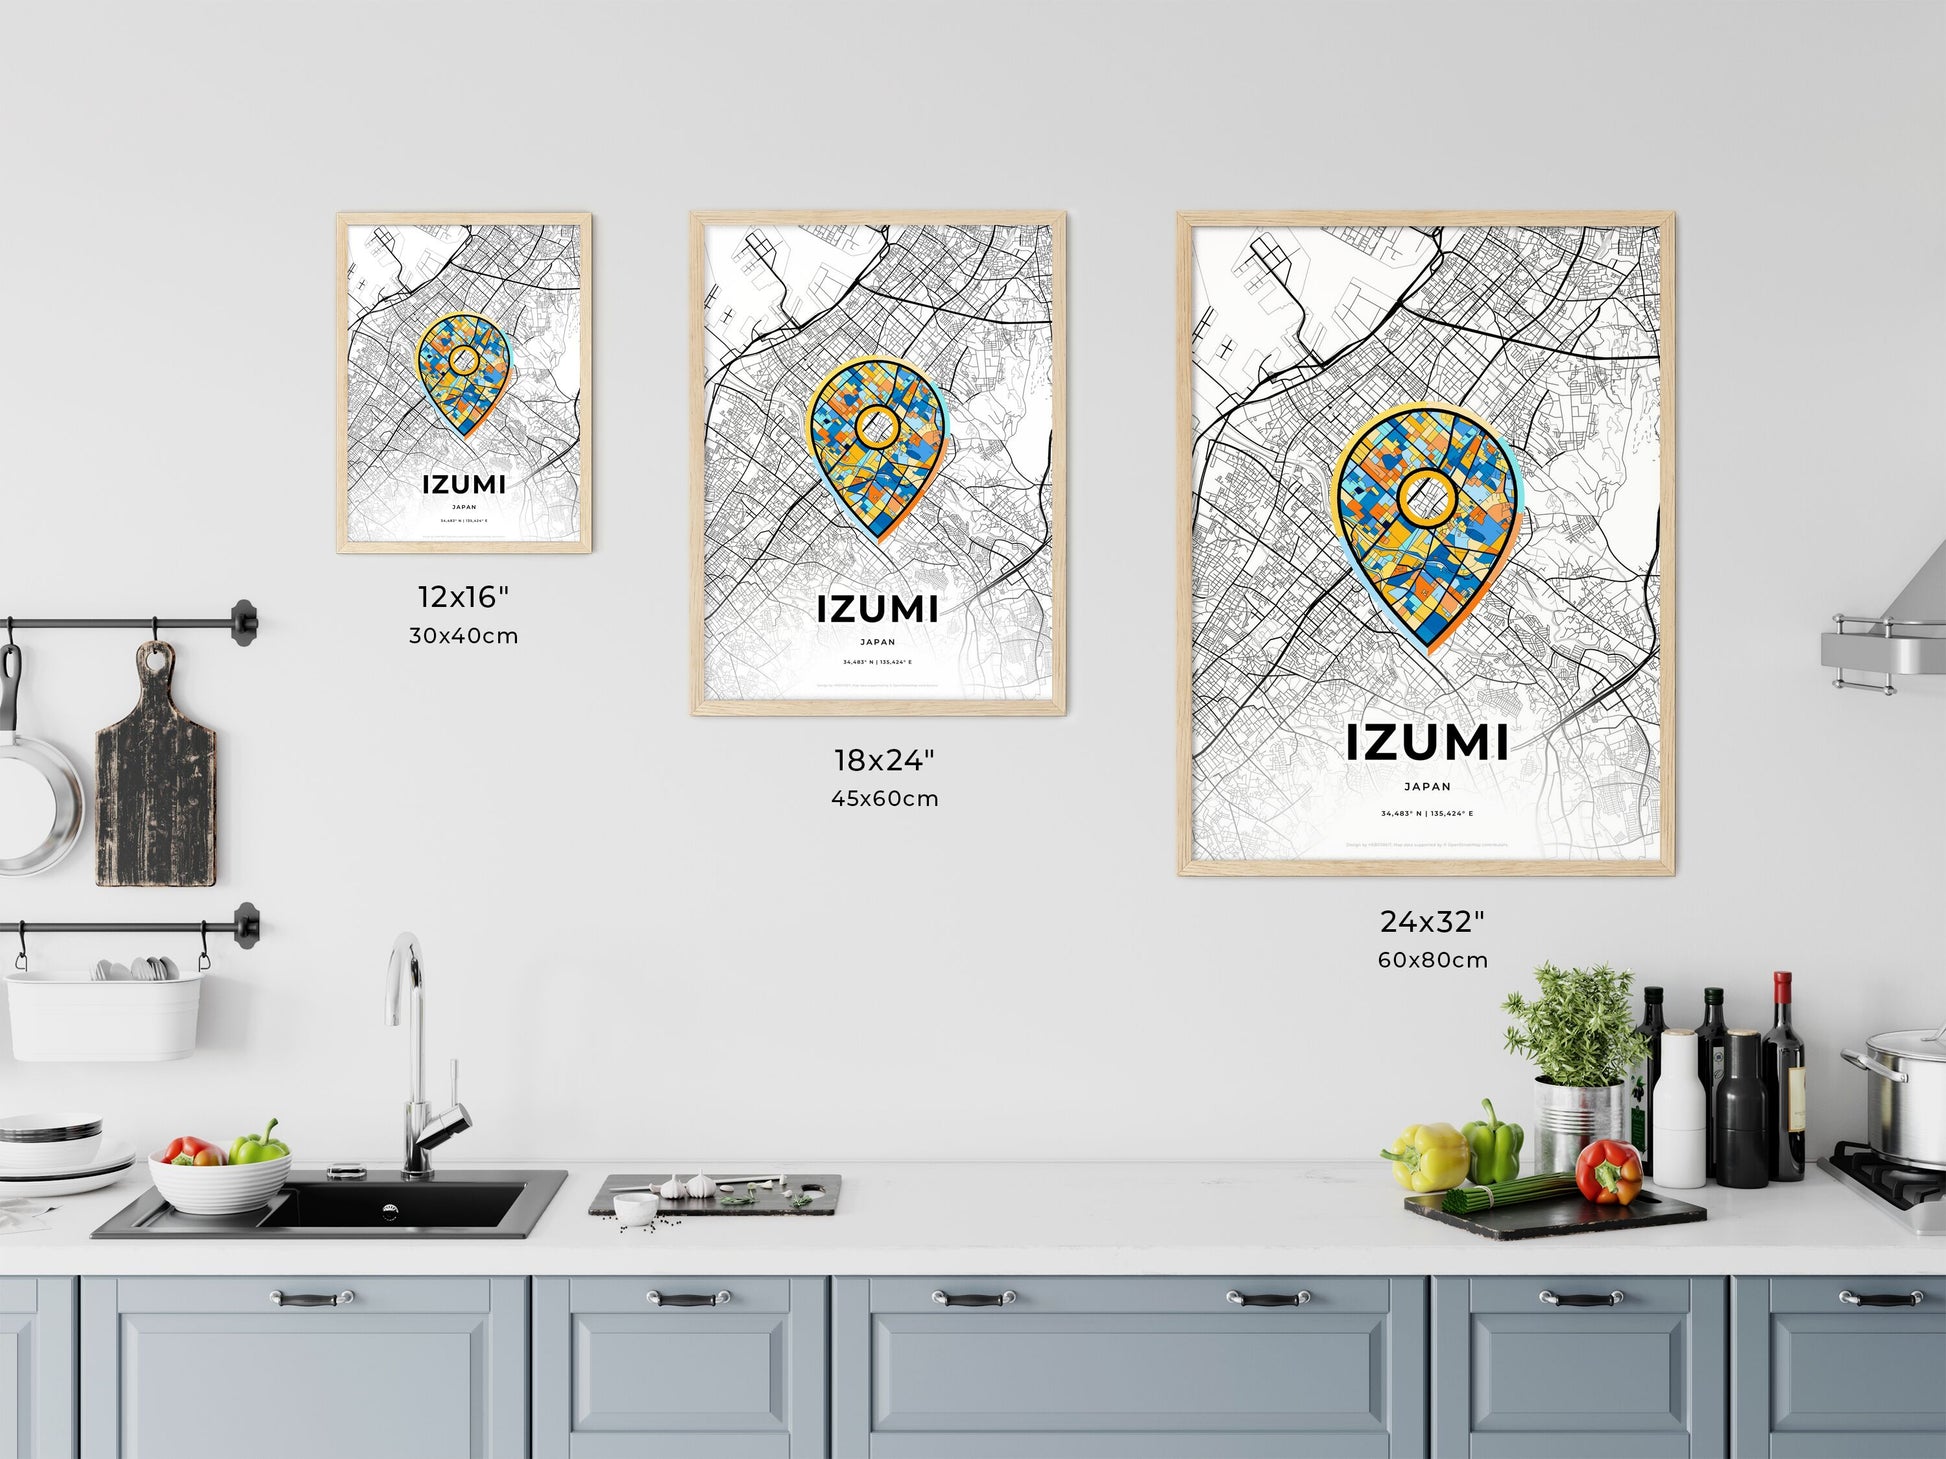 IZUMI JAPAN minimal art map with a colorful icon. Where it all began, Couple map gift.